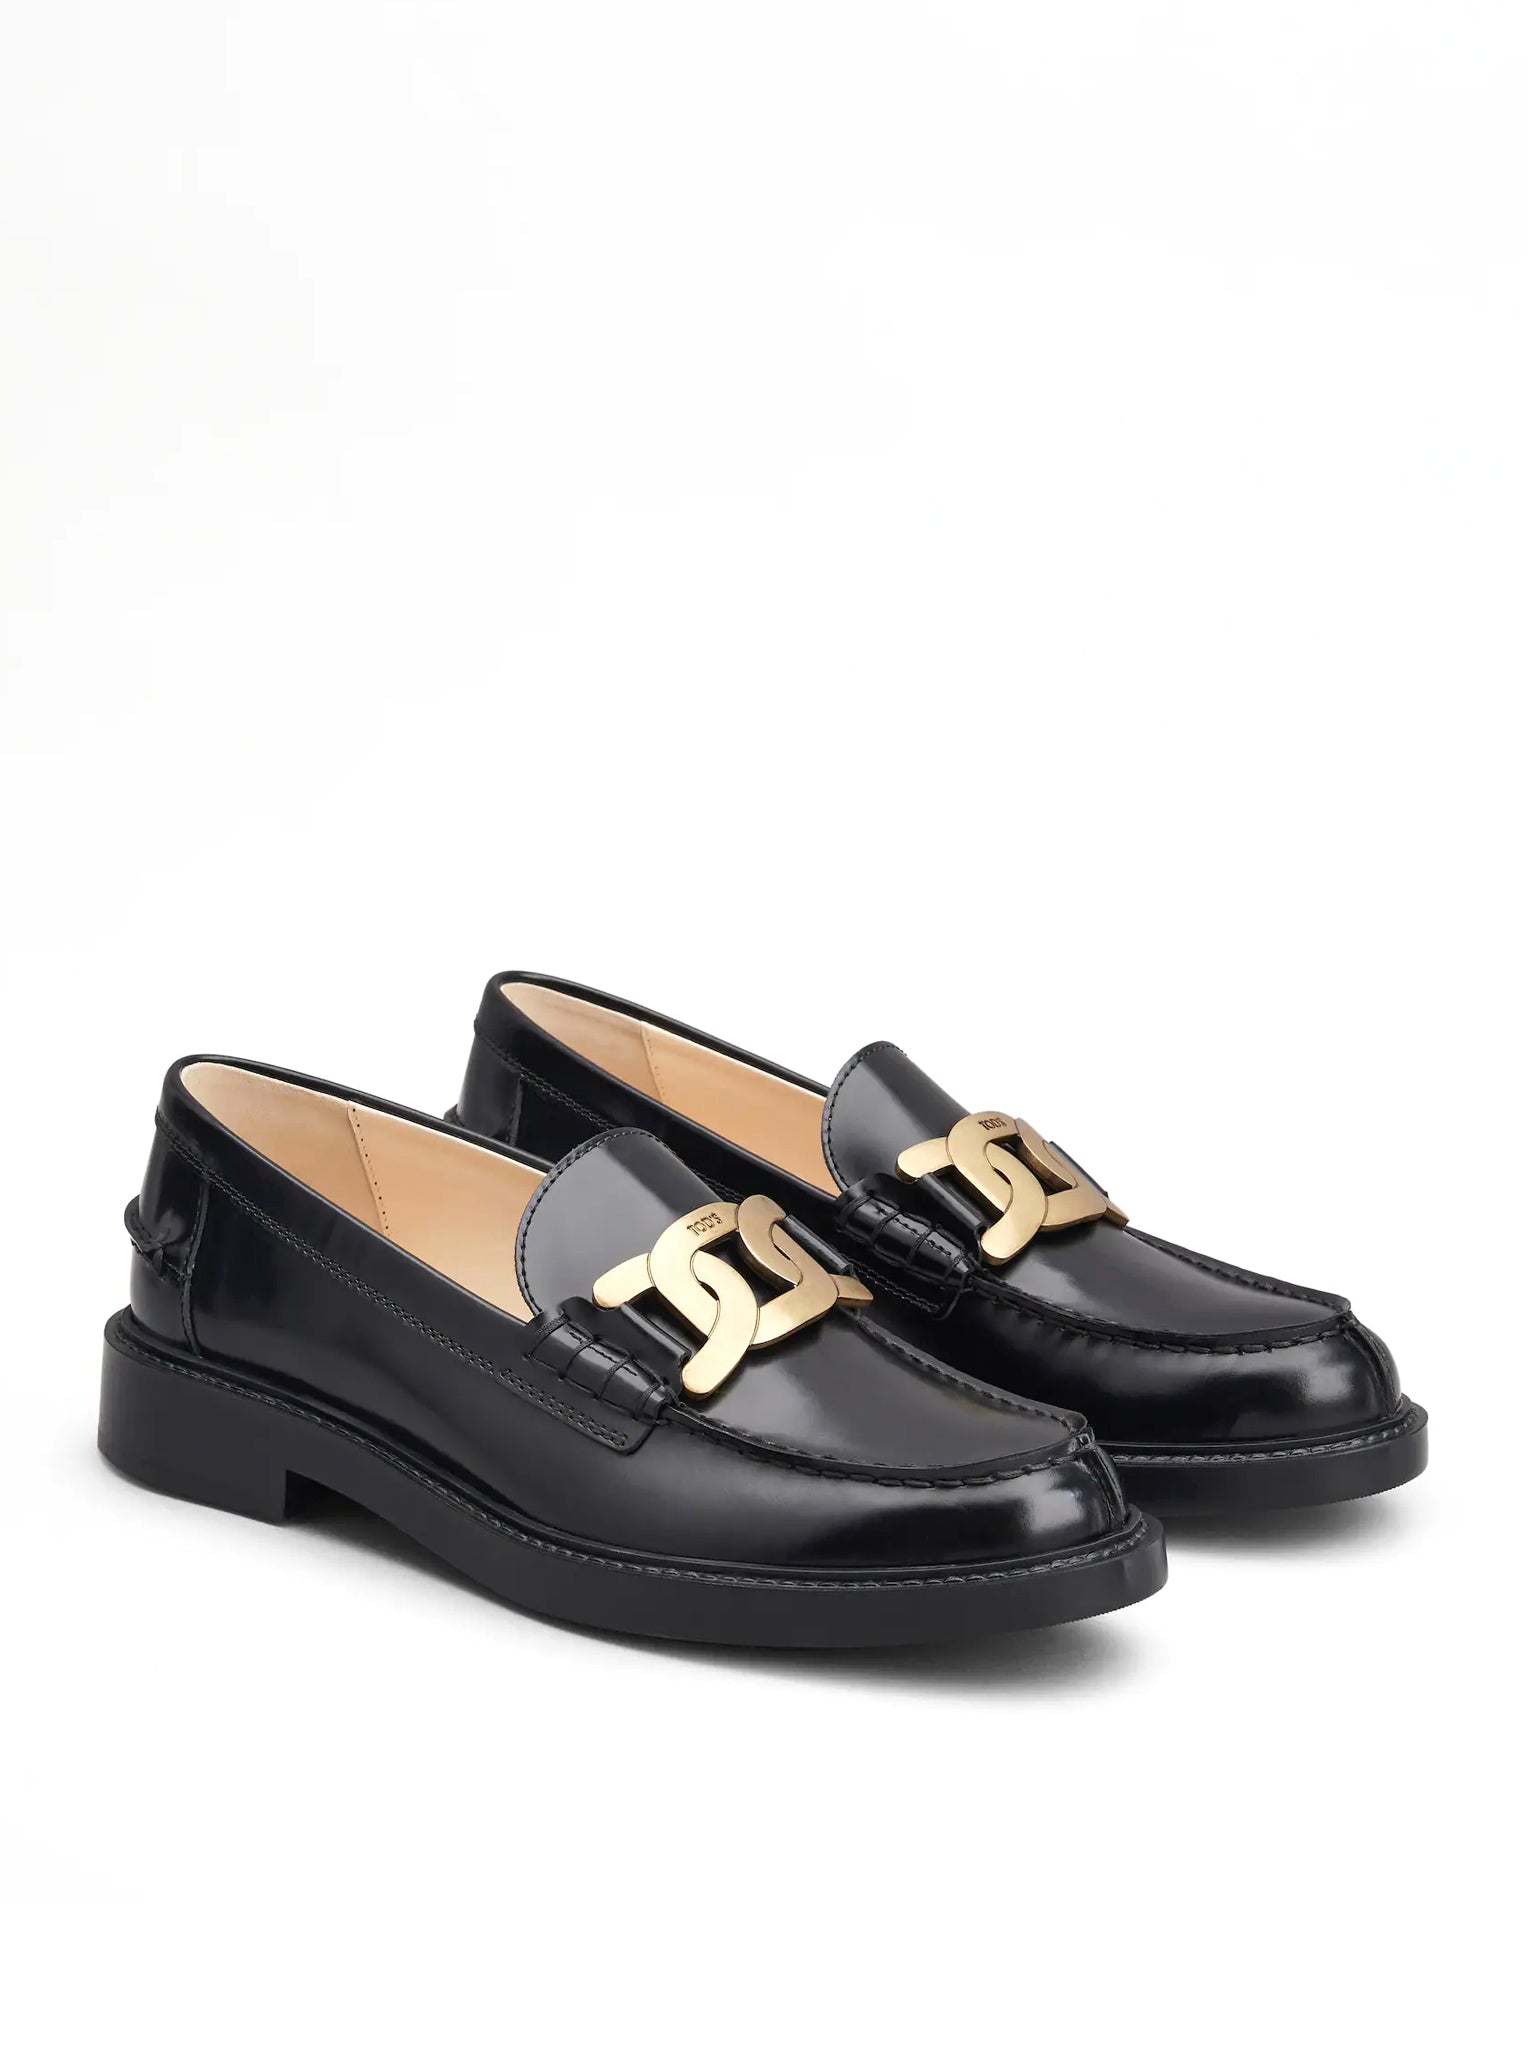 HOOK LOAFERS